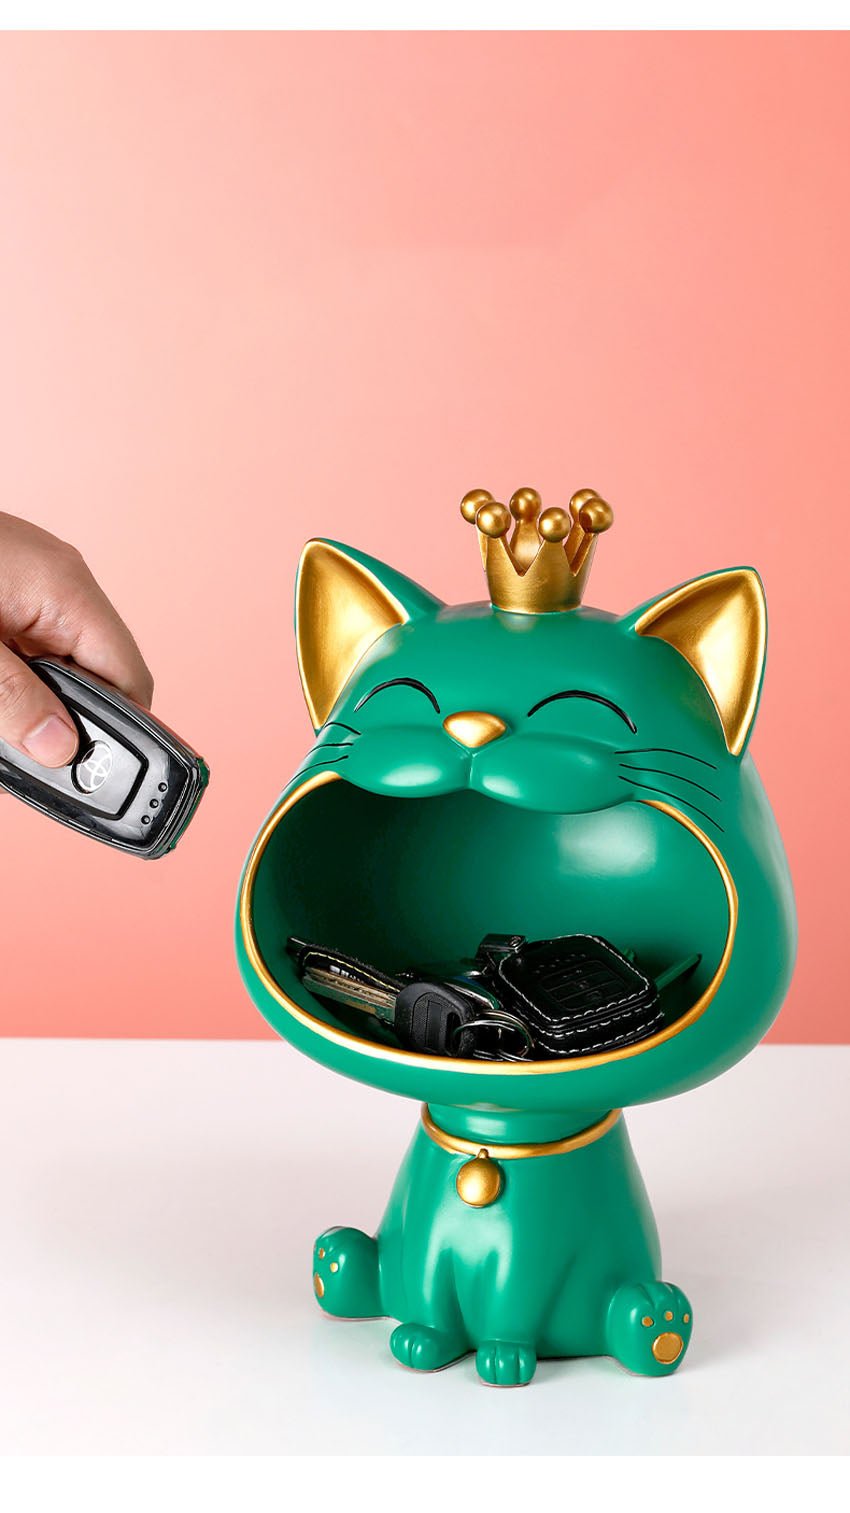 a key holder from a green cat statue